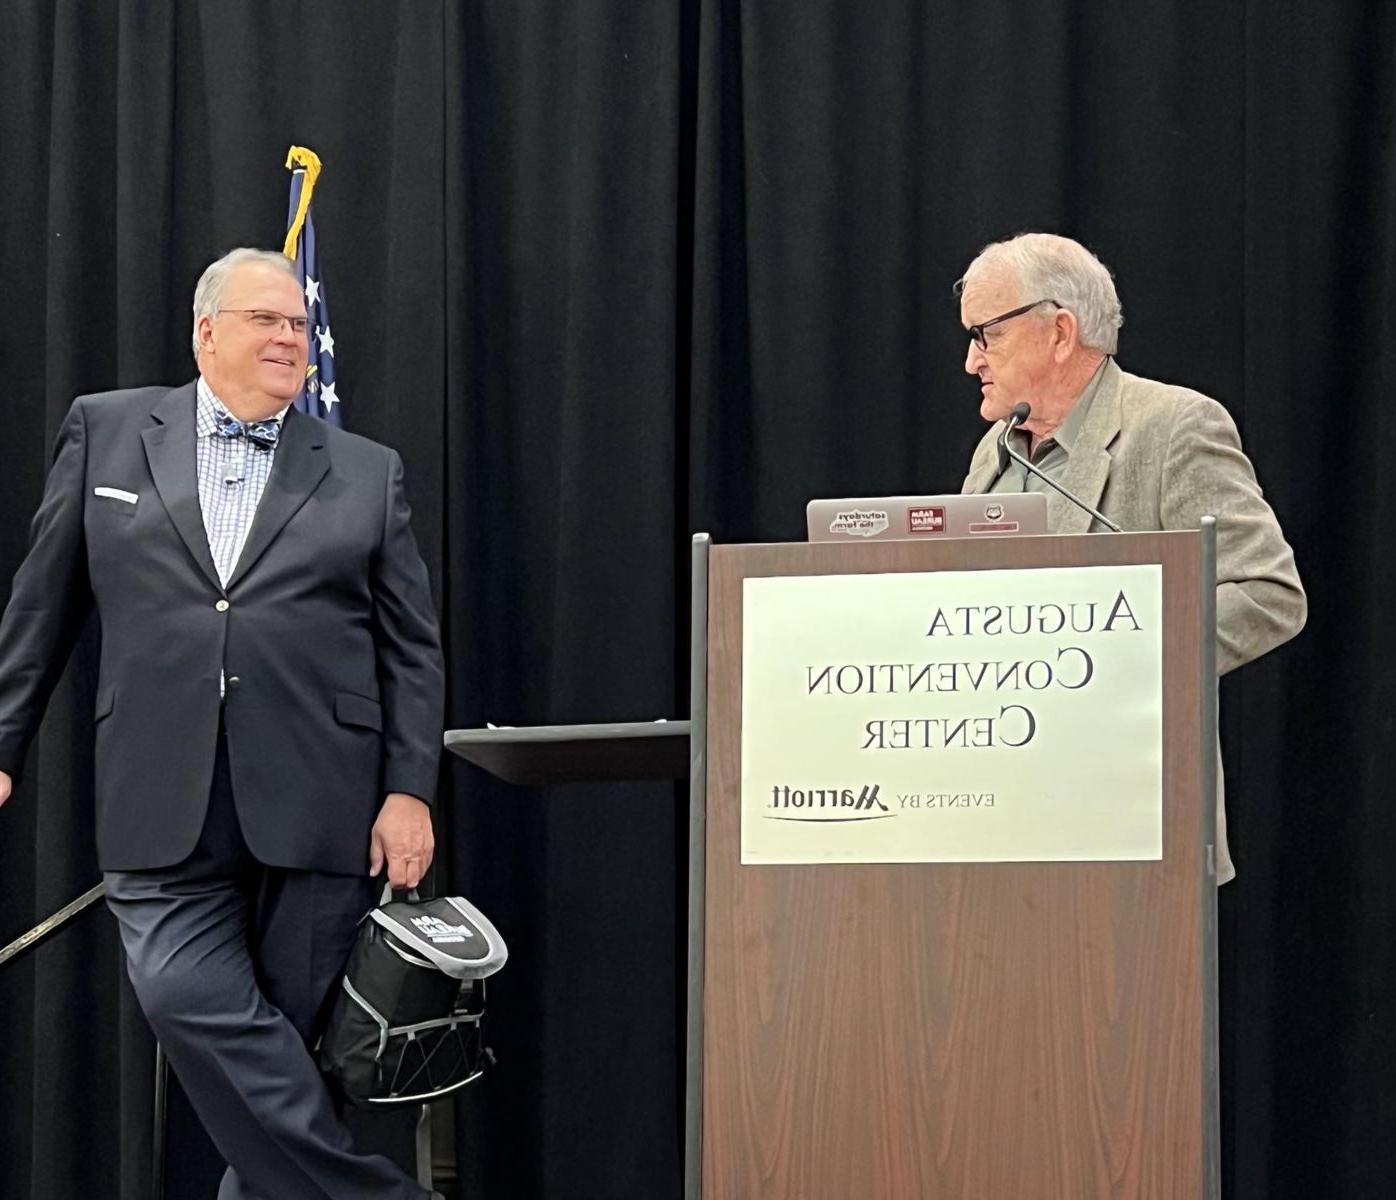 GFB President Tom McCall thanks Roger Rickard of Voices in Advocacy for his keynote address at the Presidents' Conference earlier this week